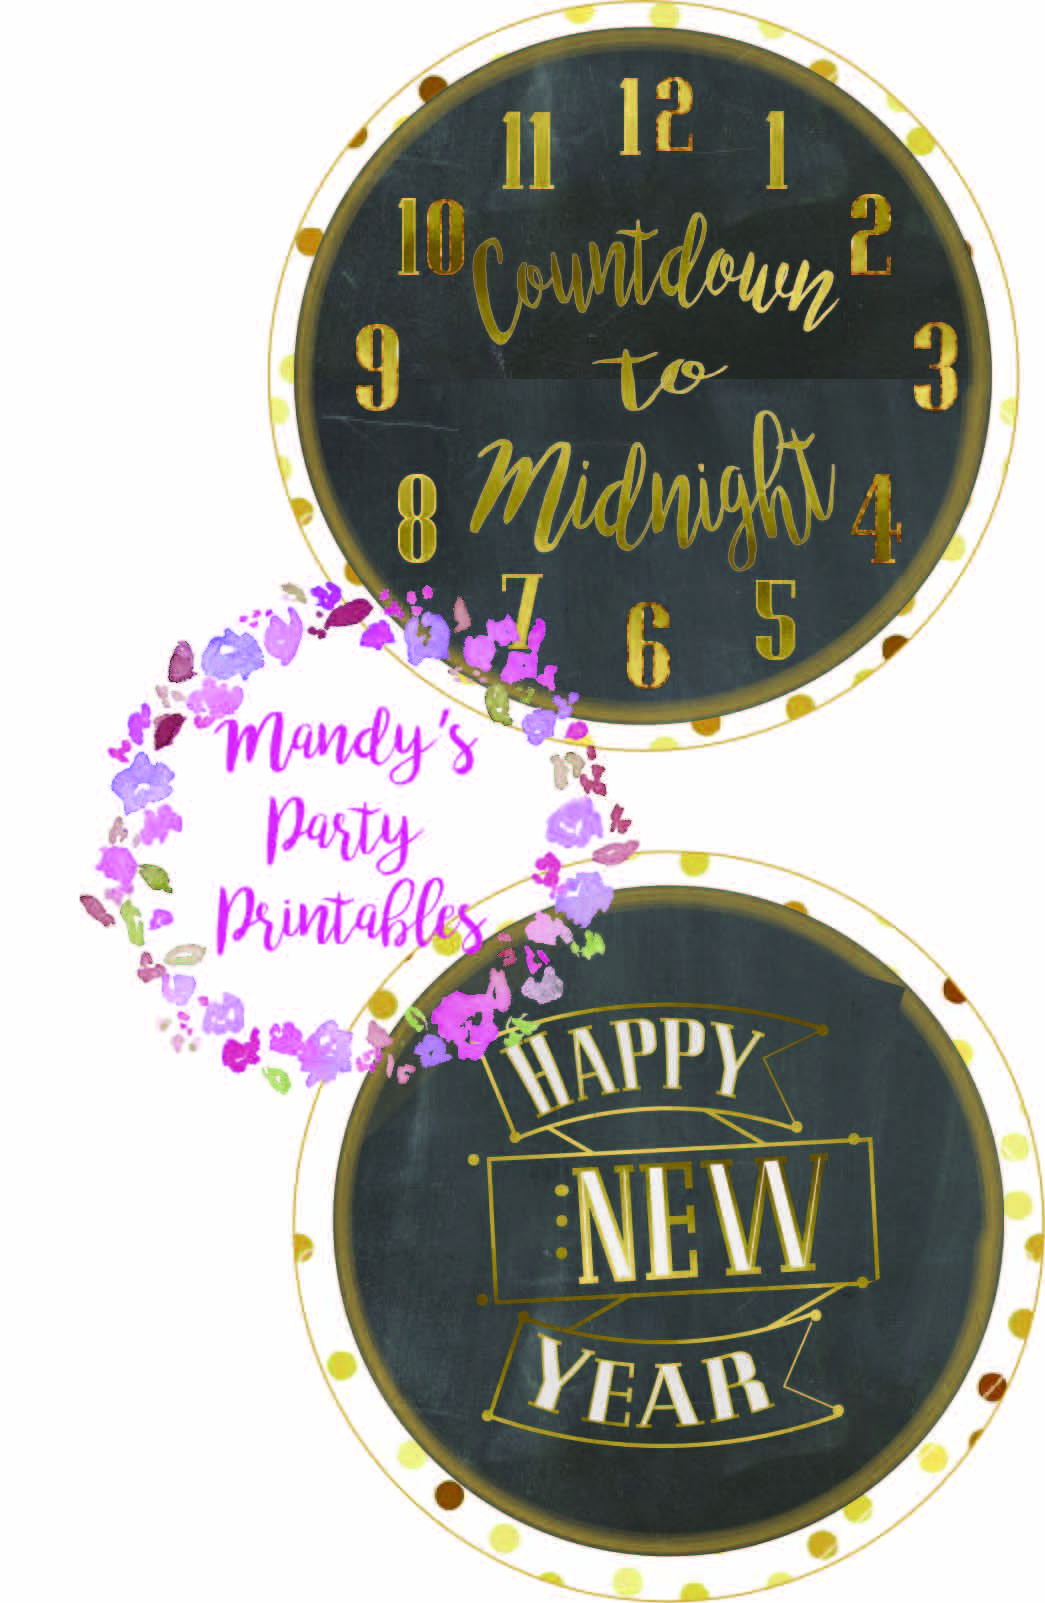 Countdown to Midnight Free New Year's Eve Printables via Mandy's Party Printables